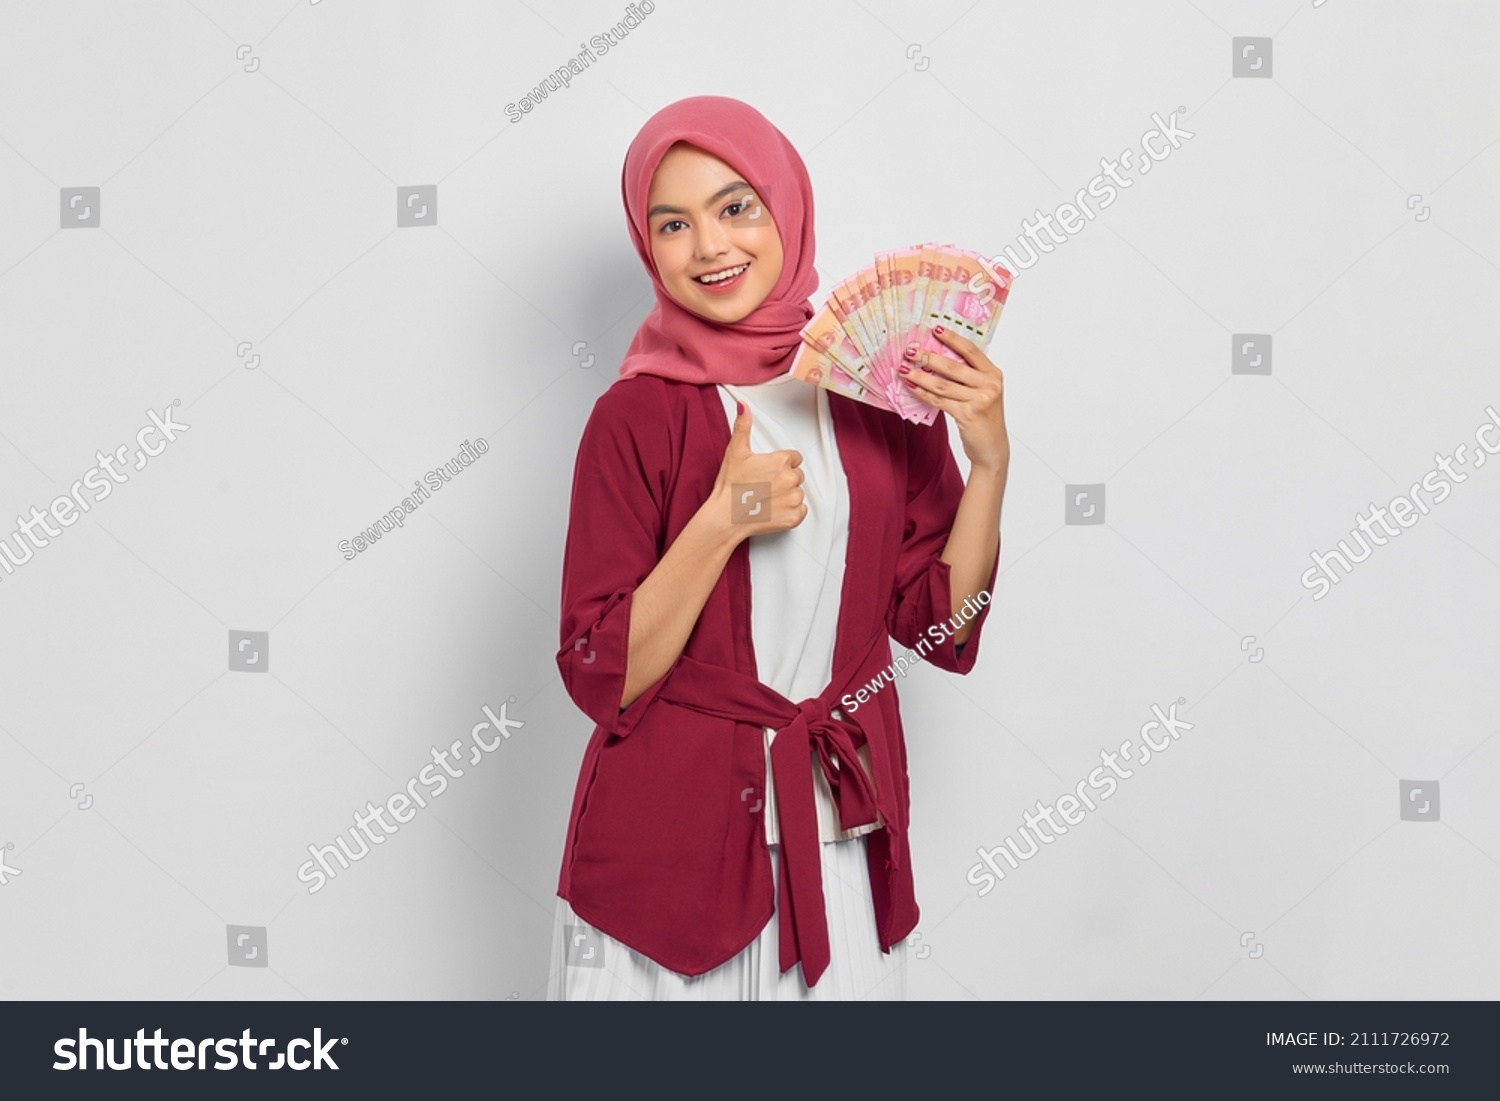 Cheerful beautiful Asian woman in casual shirt and hijab holding Indonesian rupiah banknotes, showing thumb up gesture isolated over white background. People religious lifestyle concept #2111726972